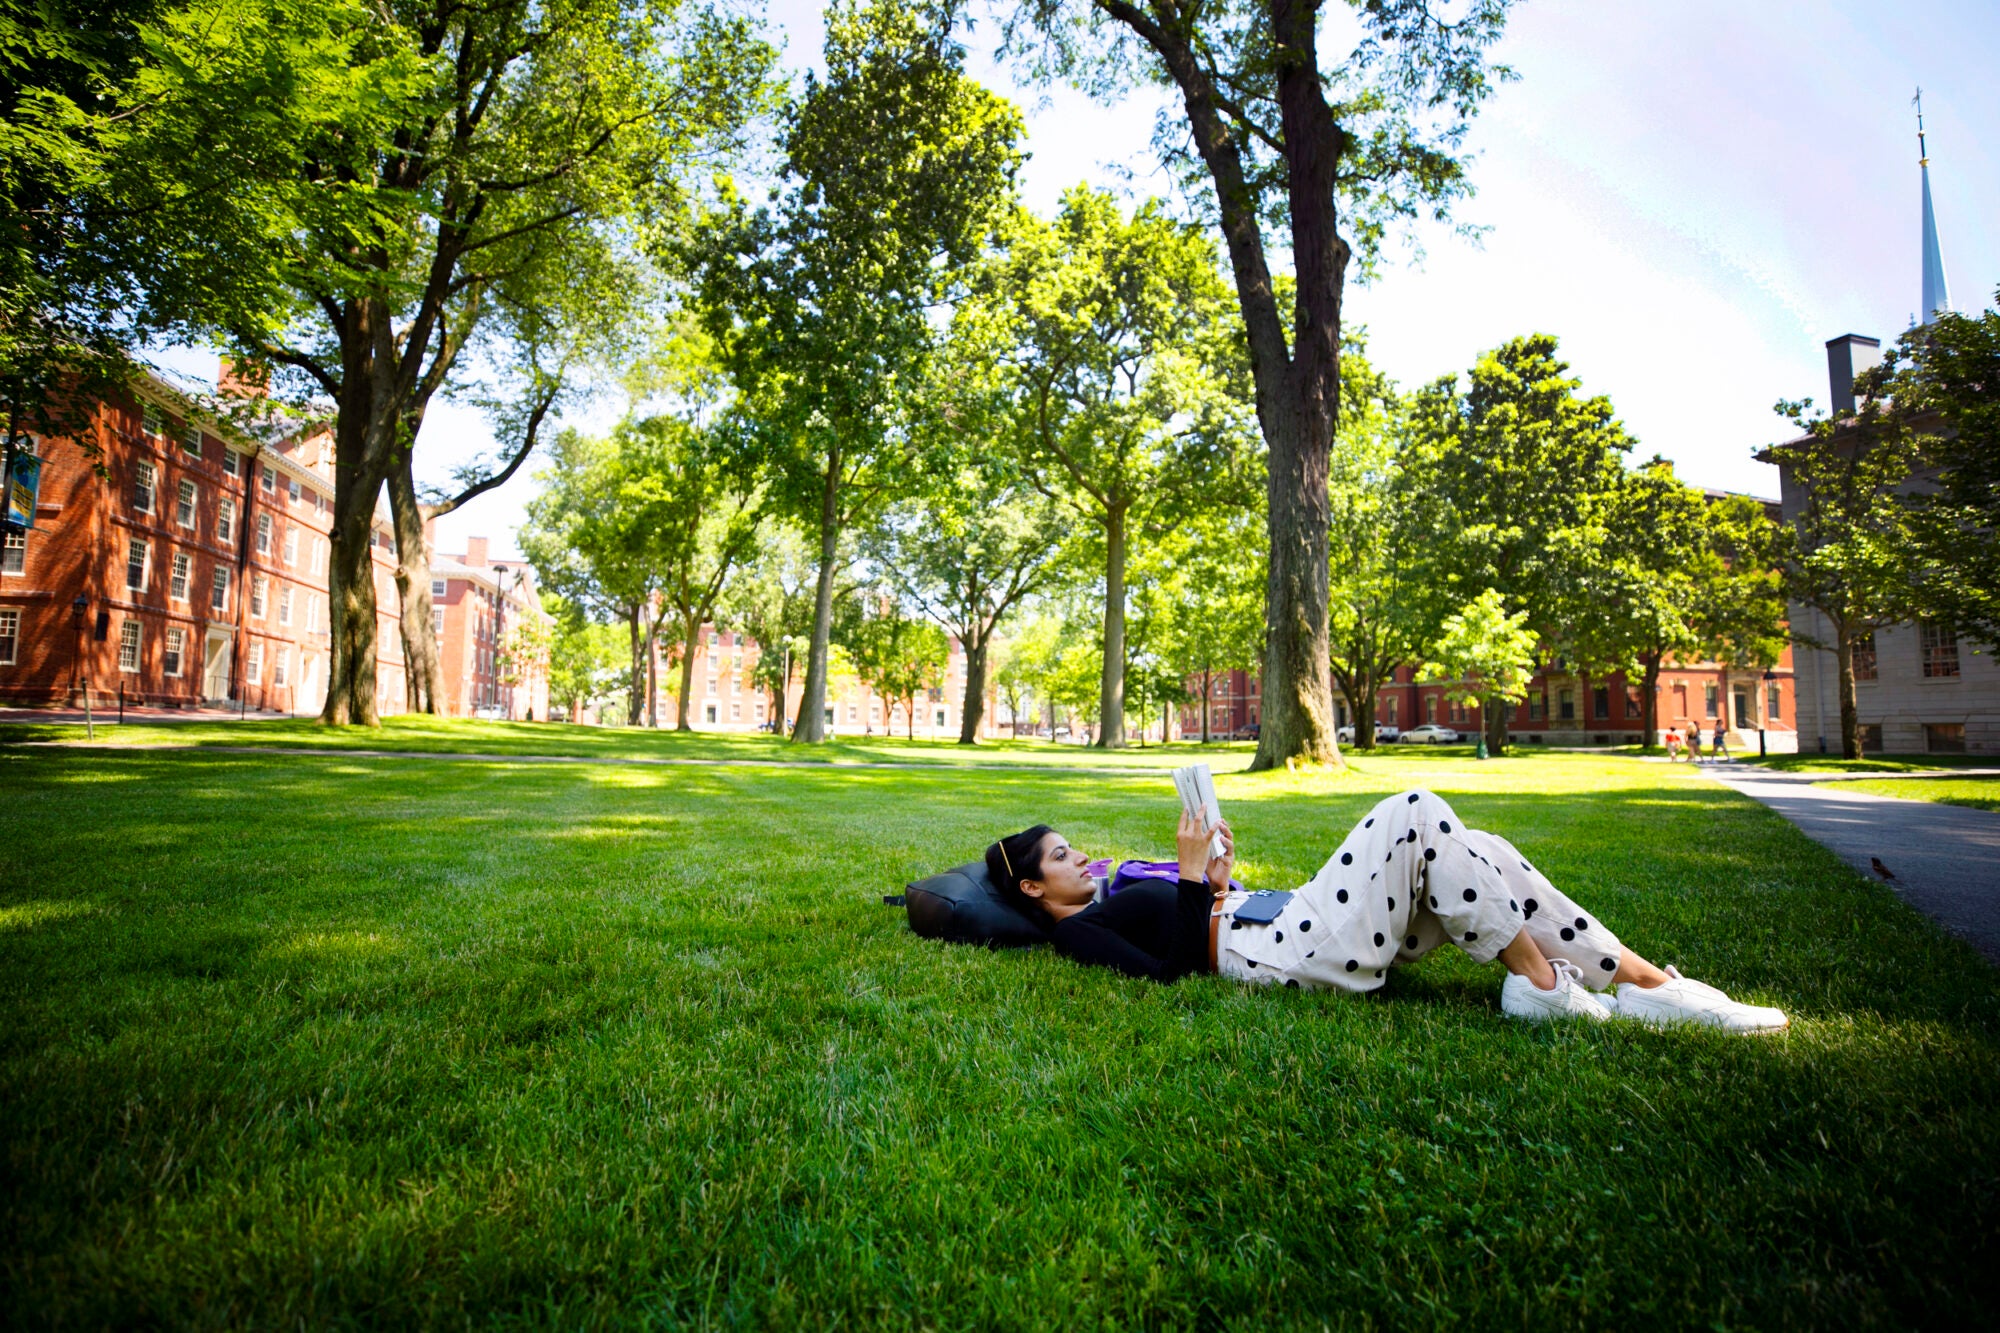 A young woman lays on grass reading a book